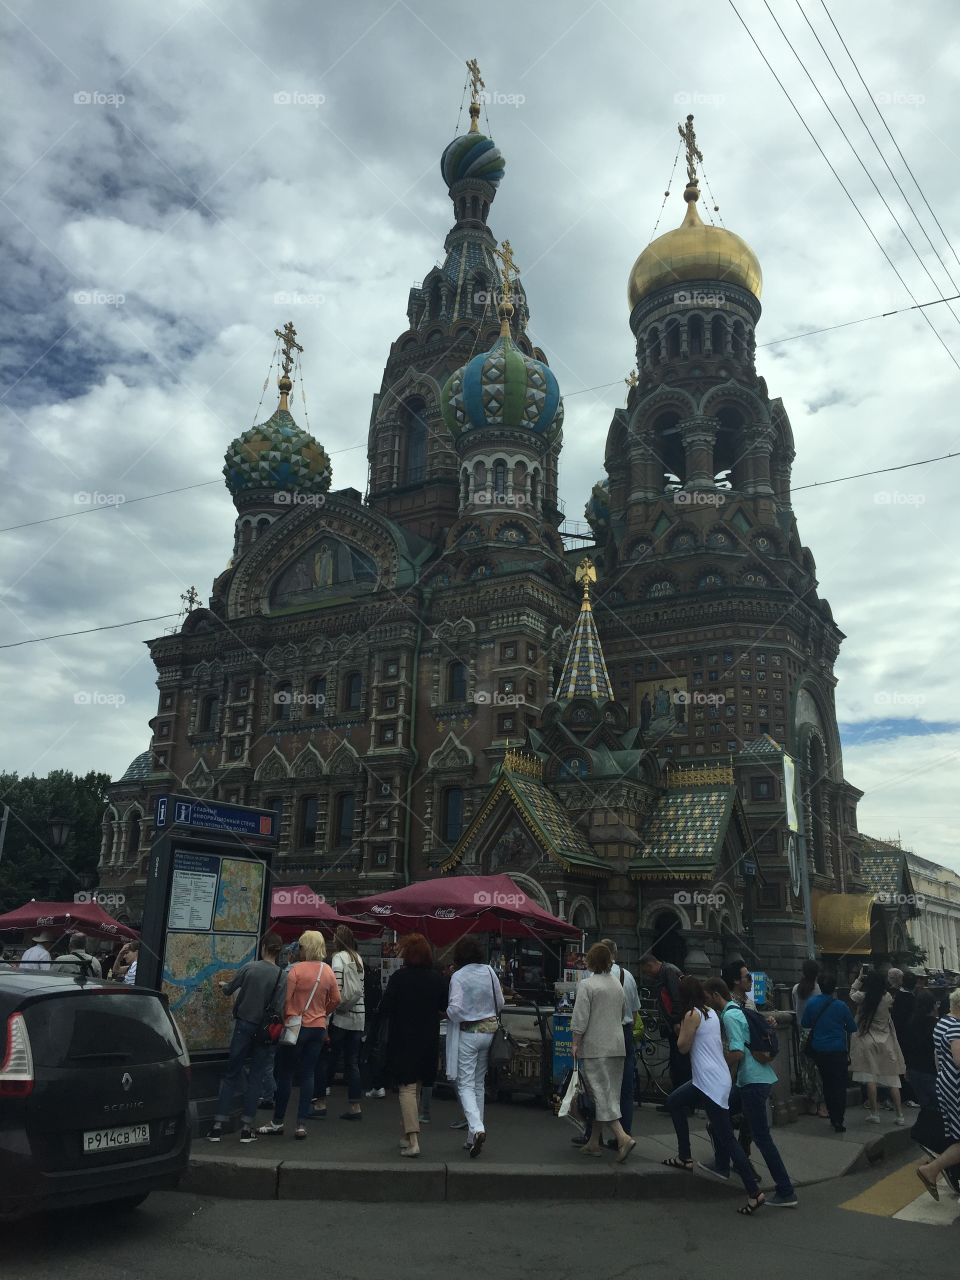 Russia saint basil’s cathedral